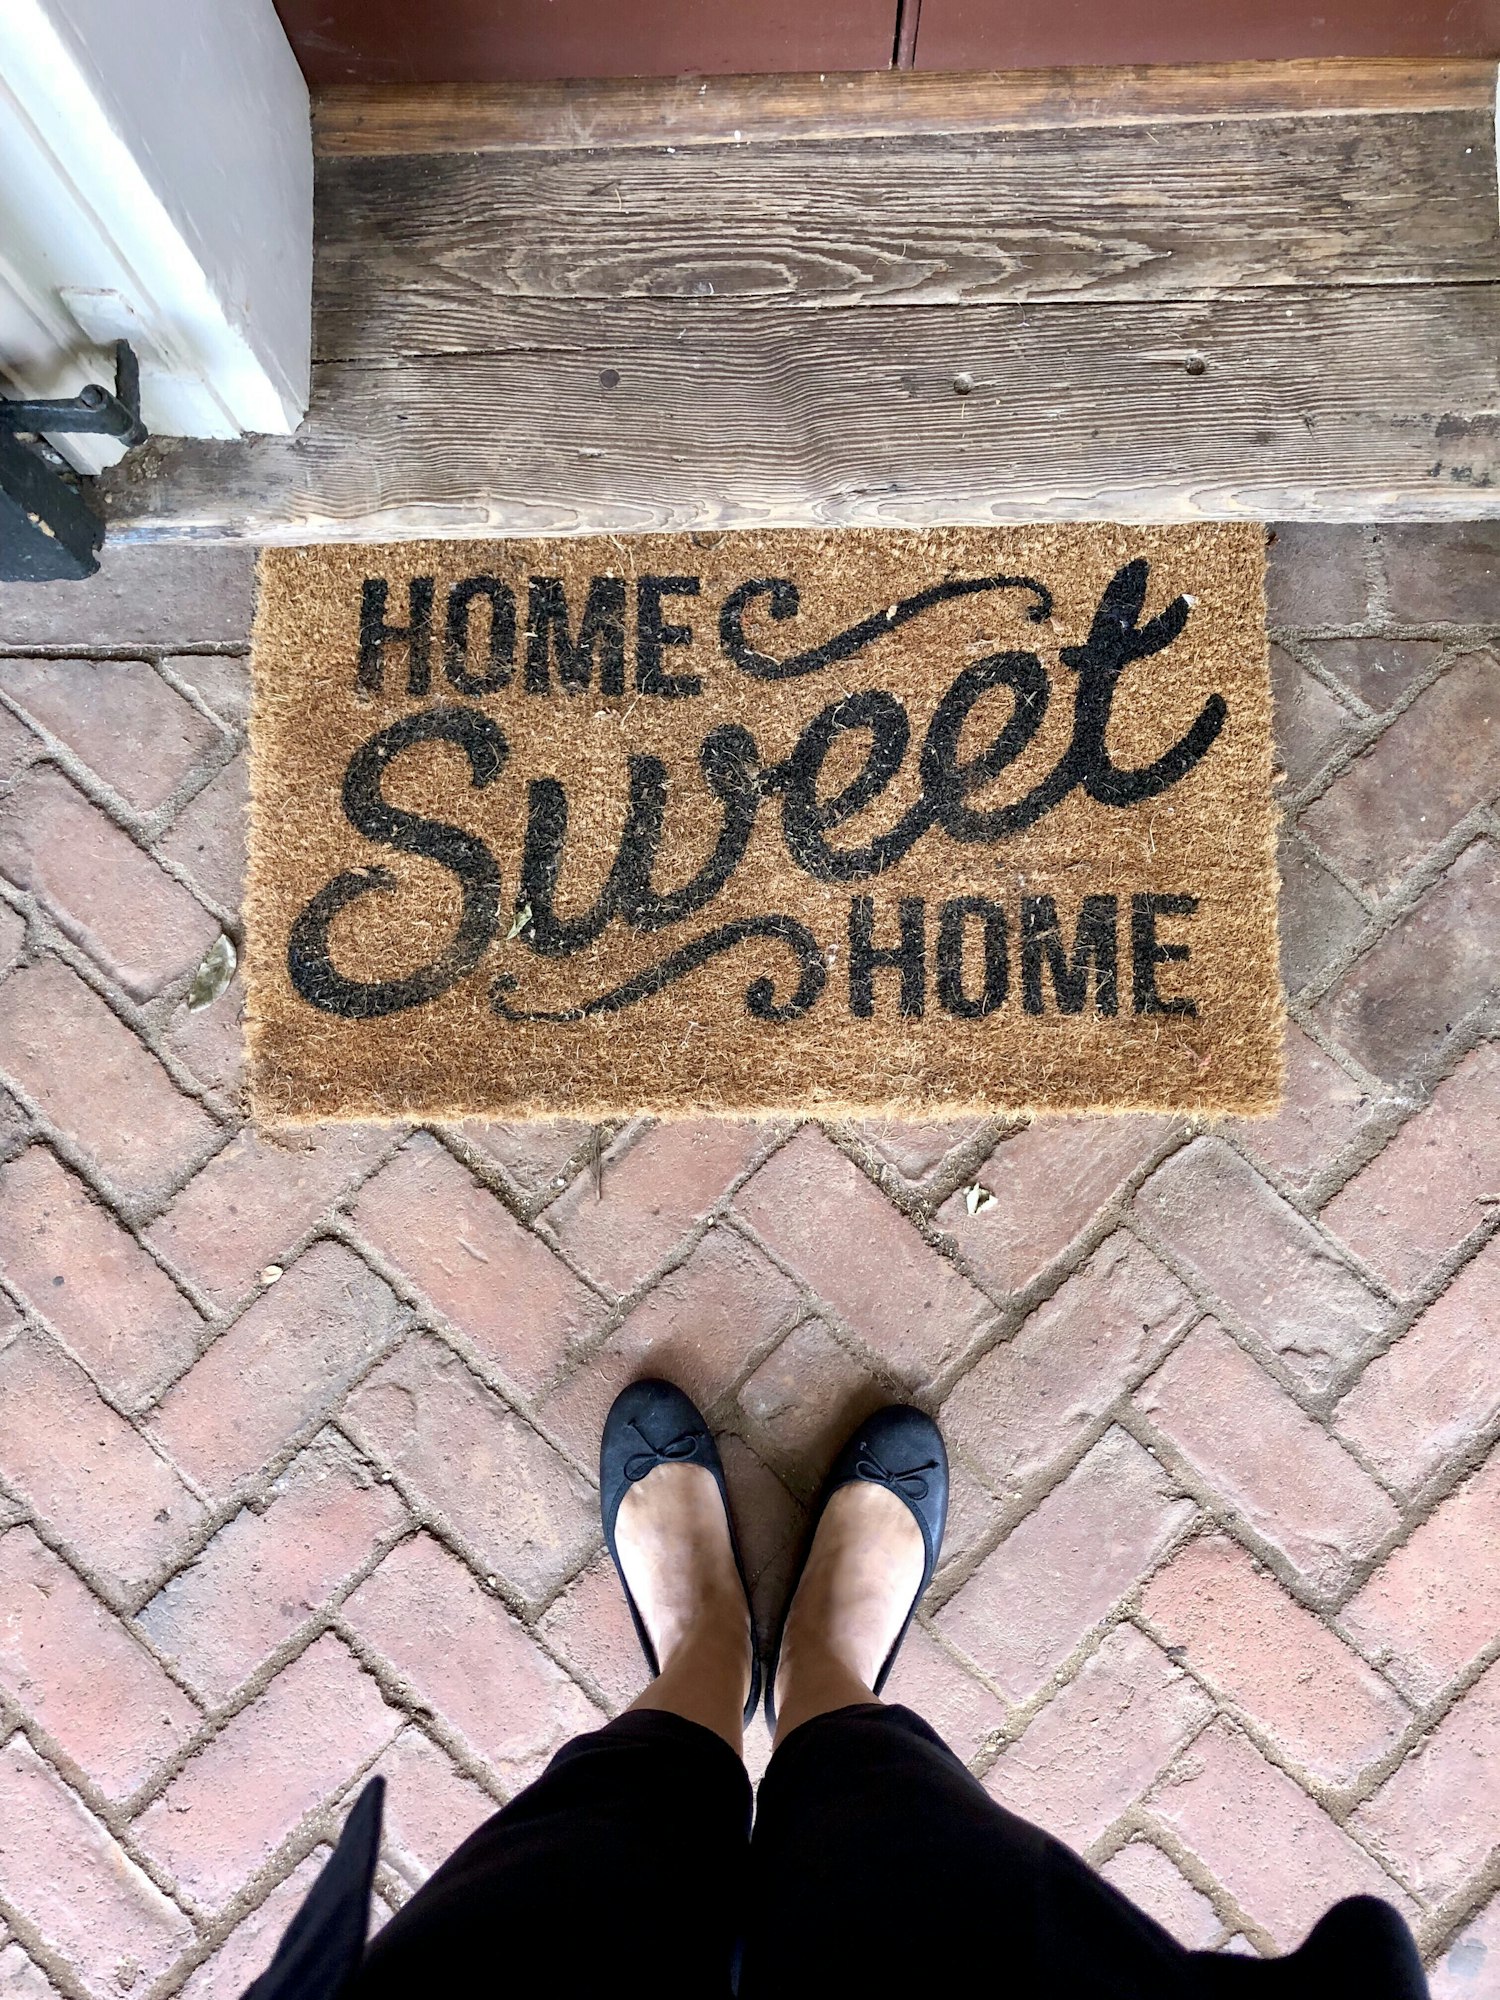 Entrance “Home Sweet Home” doormat. At hone. Real state. Homes & neighborhoods